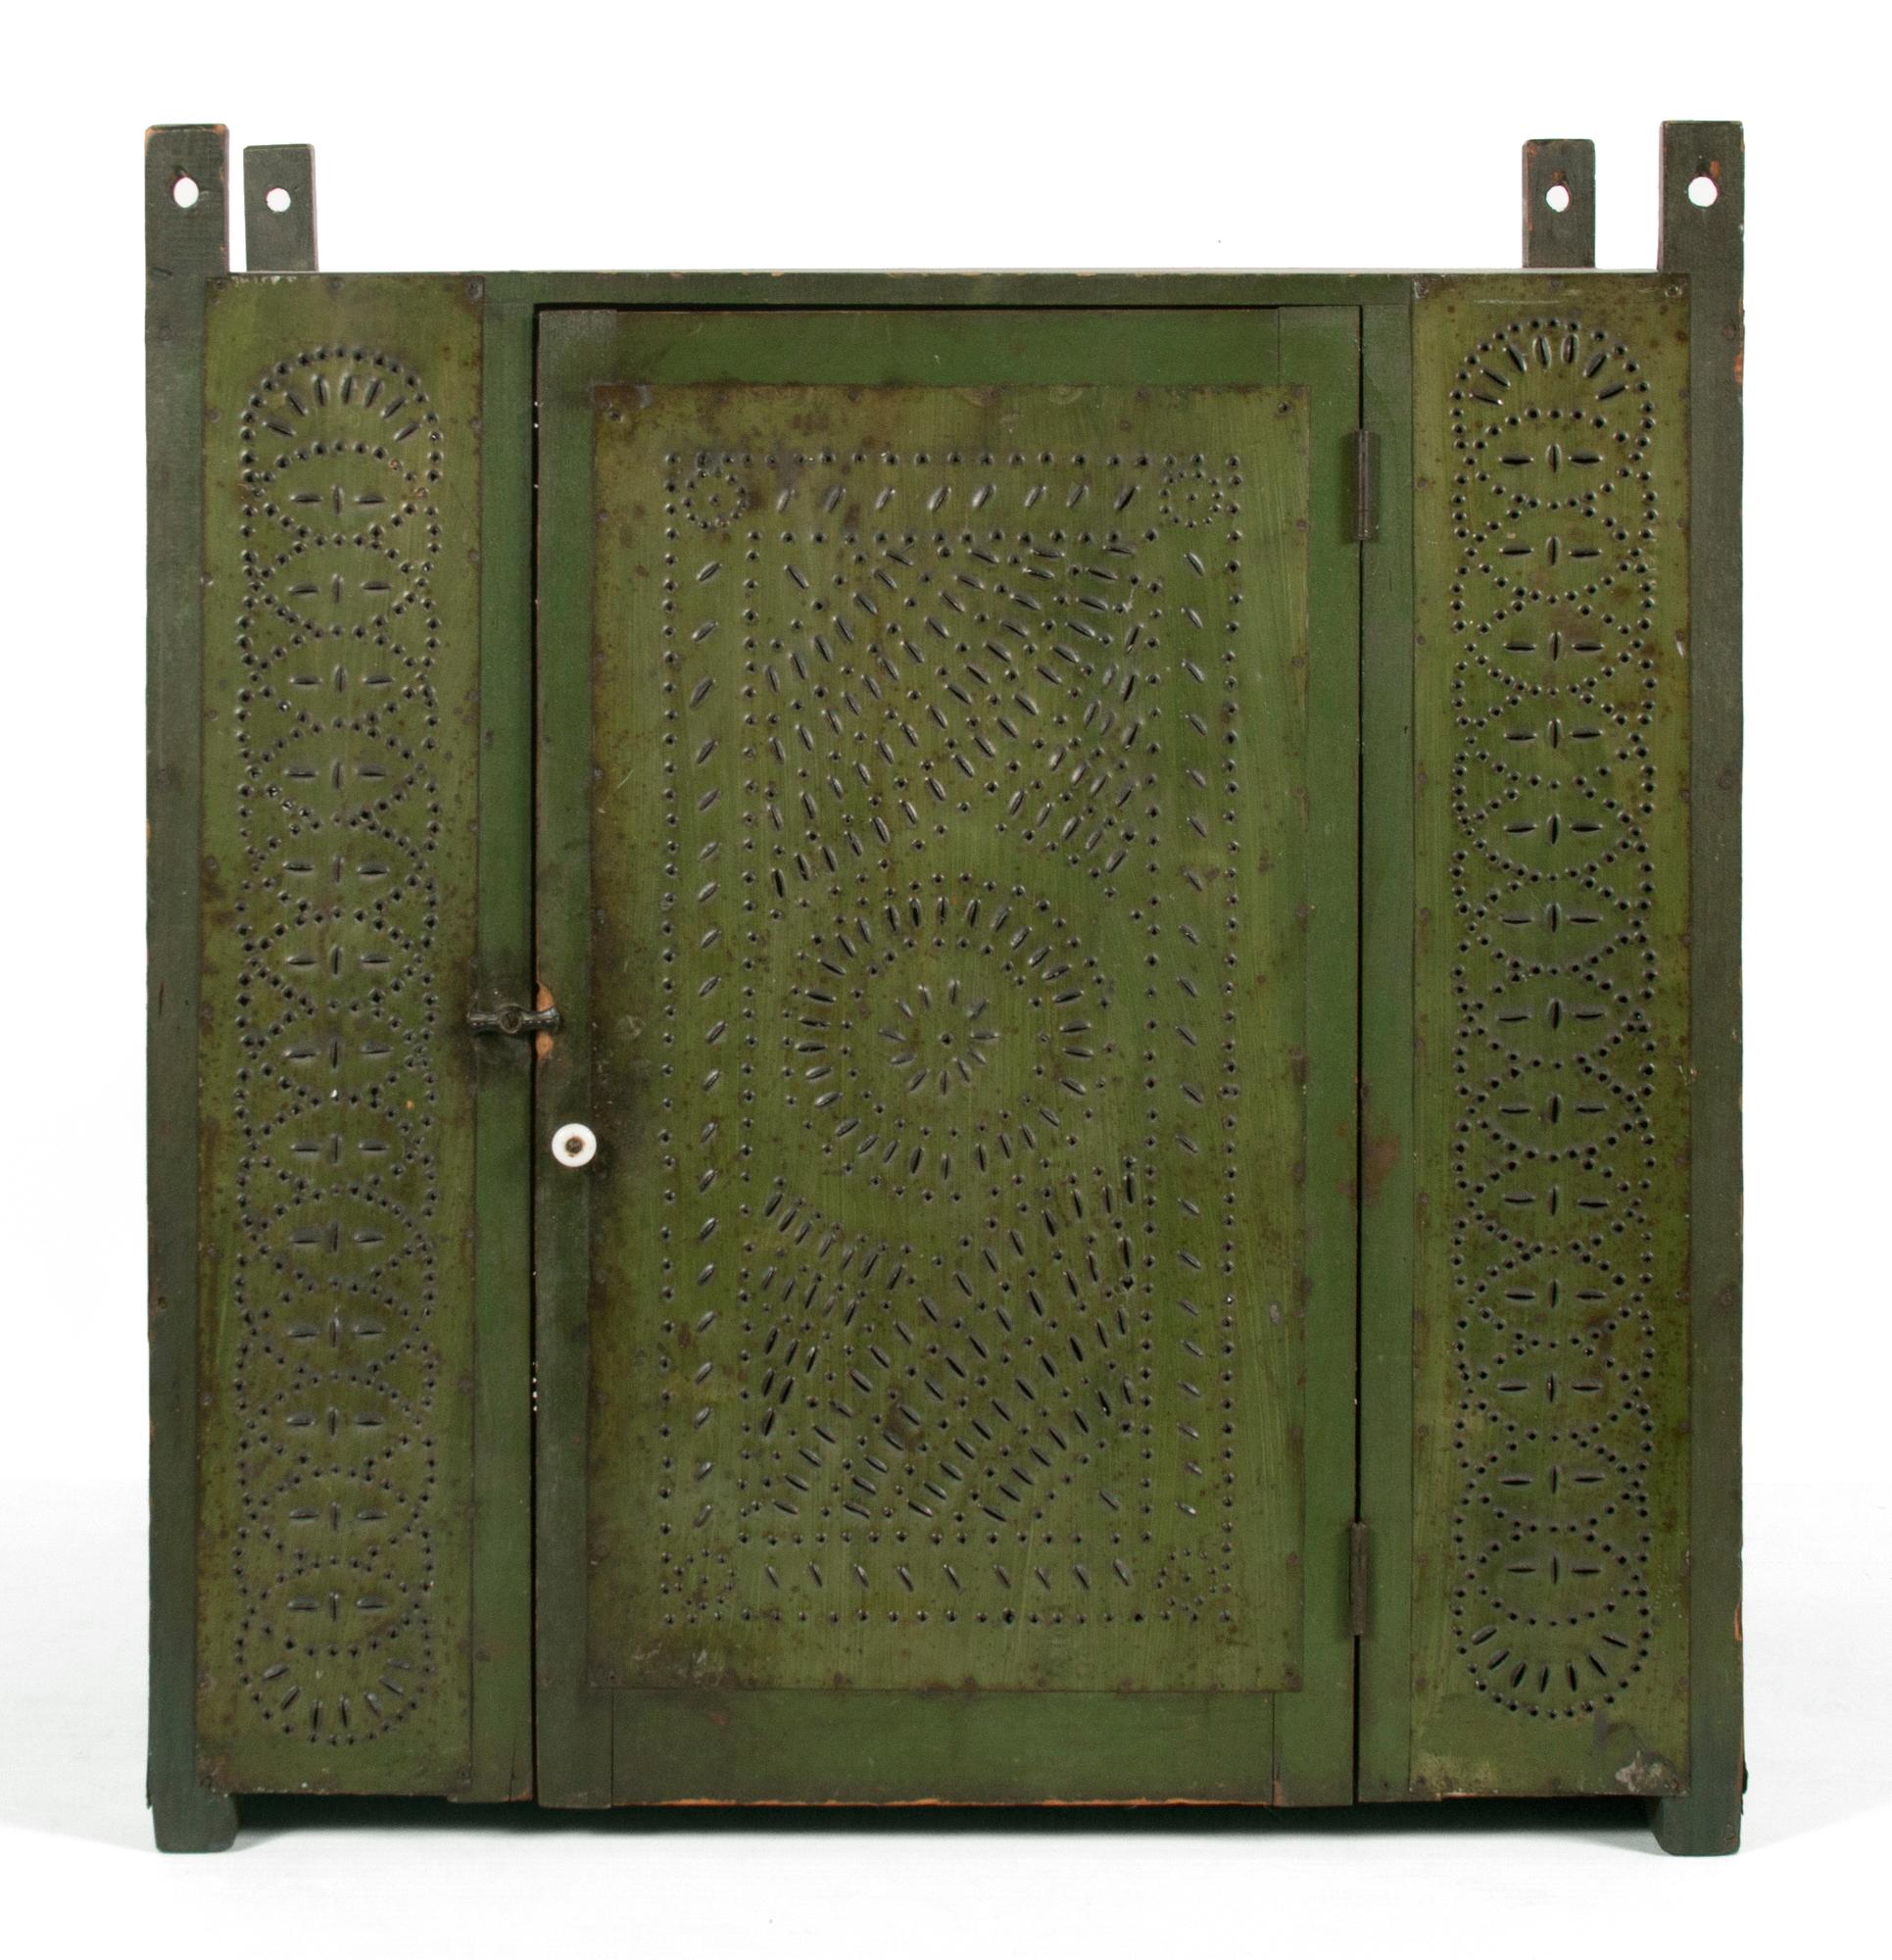 Pennsylvania hanging pie safe, in first surface green paint, with circular medallion and opposing fan decoration, circa 1850-1880

Pennsylvania hanging pie safe, made circa 1850-1870’s, with wonderfully punched tins that have a myriad of